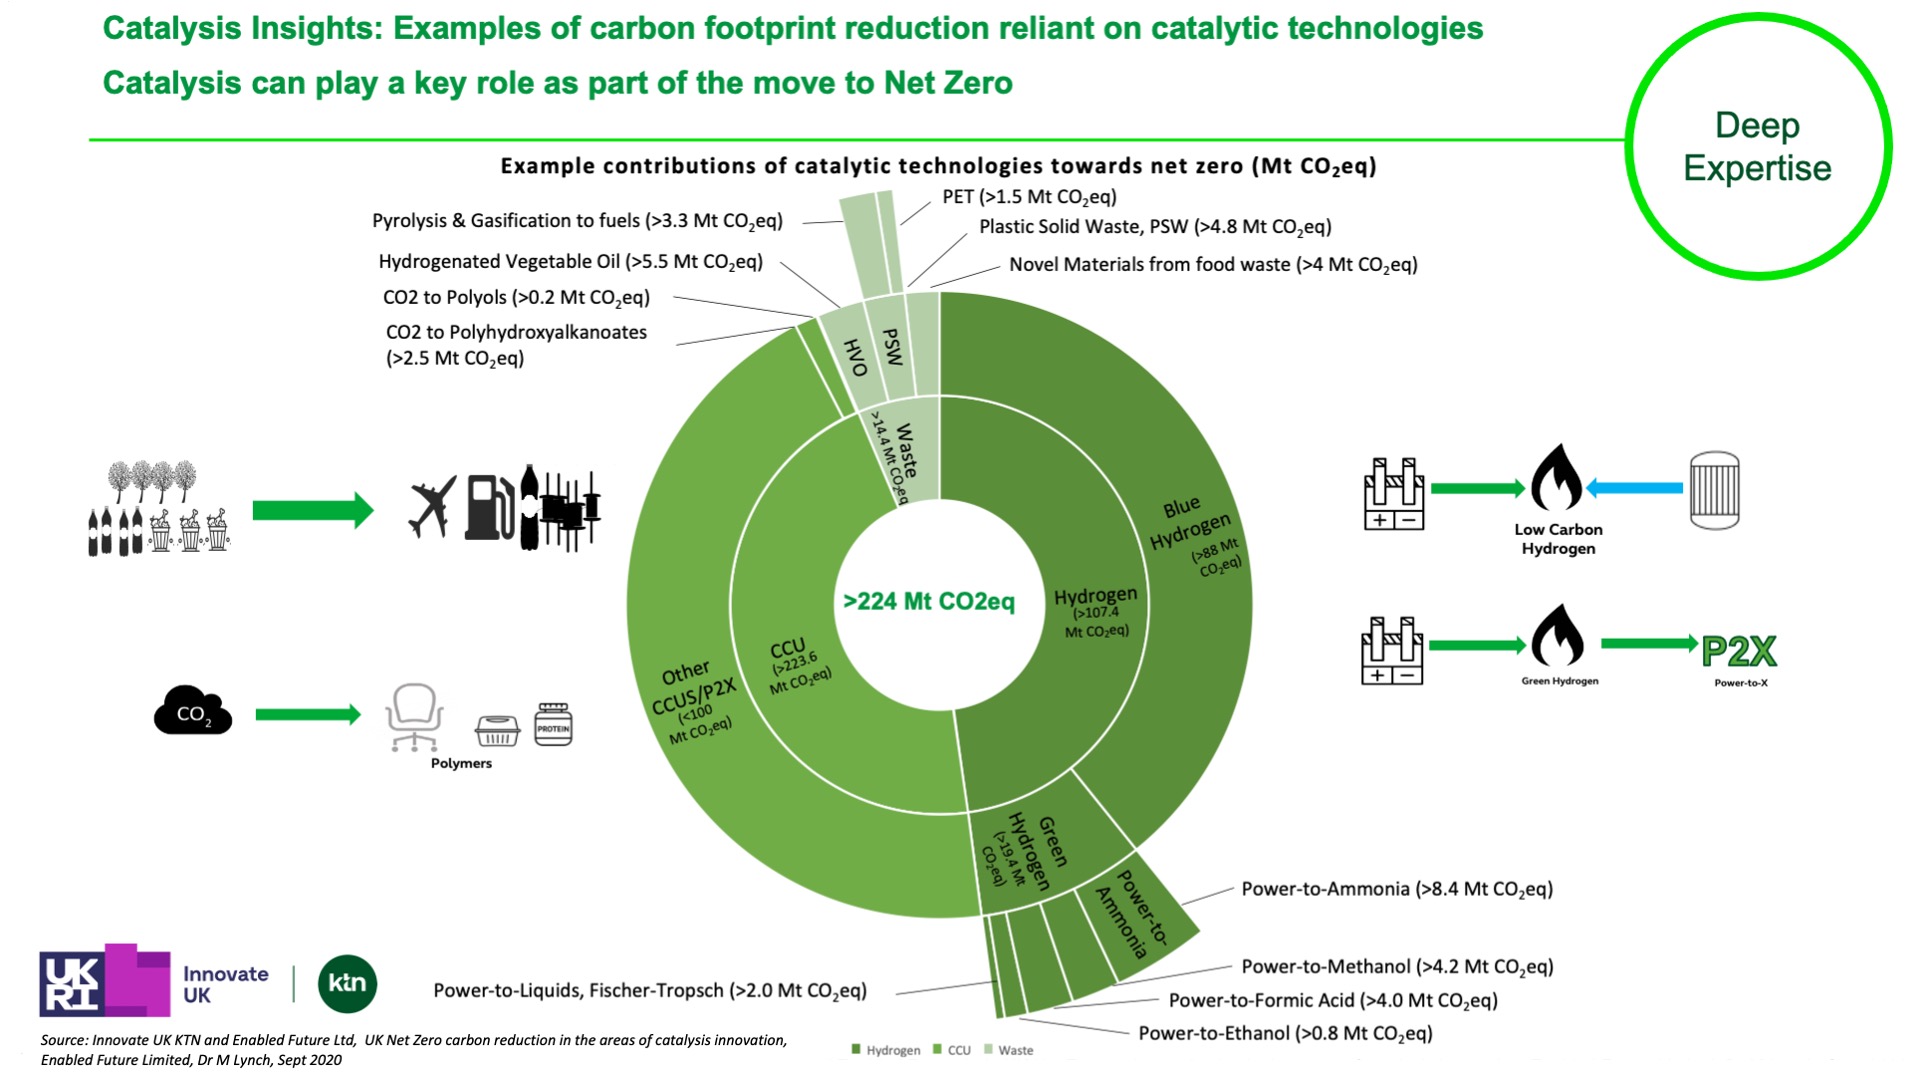 Graphic showcasing examples of carbon footprint reduction reliant on catalytic technologies, and how they play a key role as part of the move to net zero - follow link to Slideshare below for full text